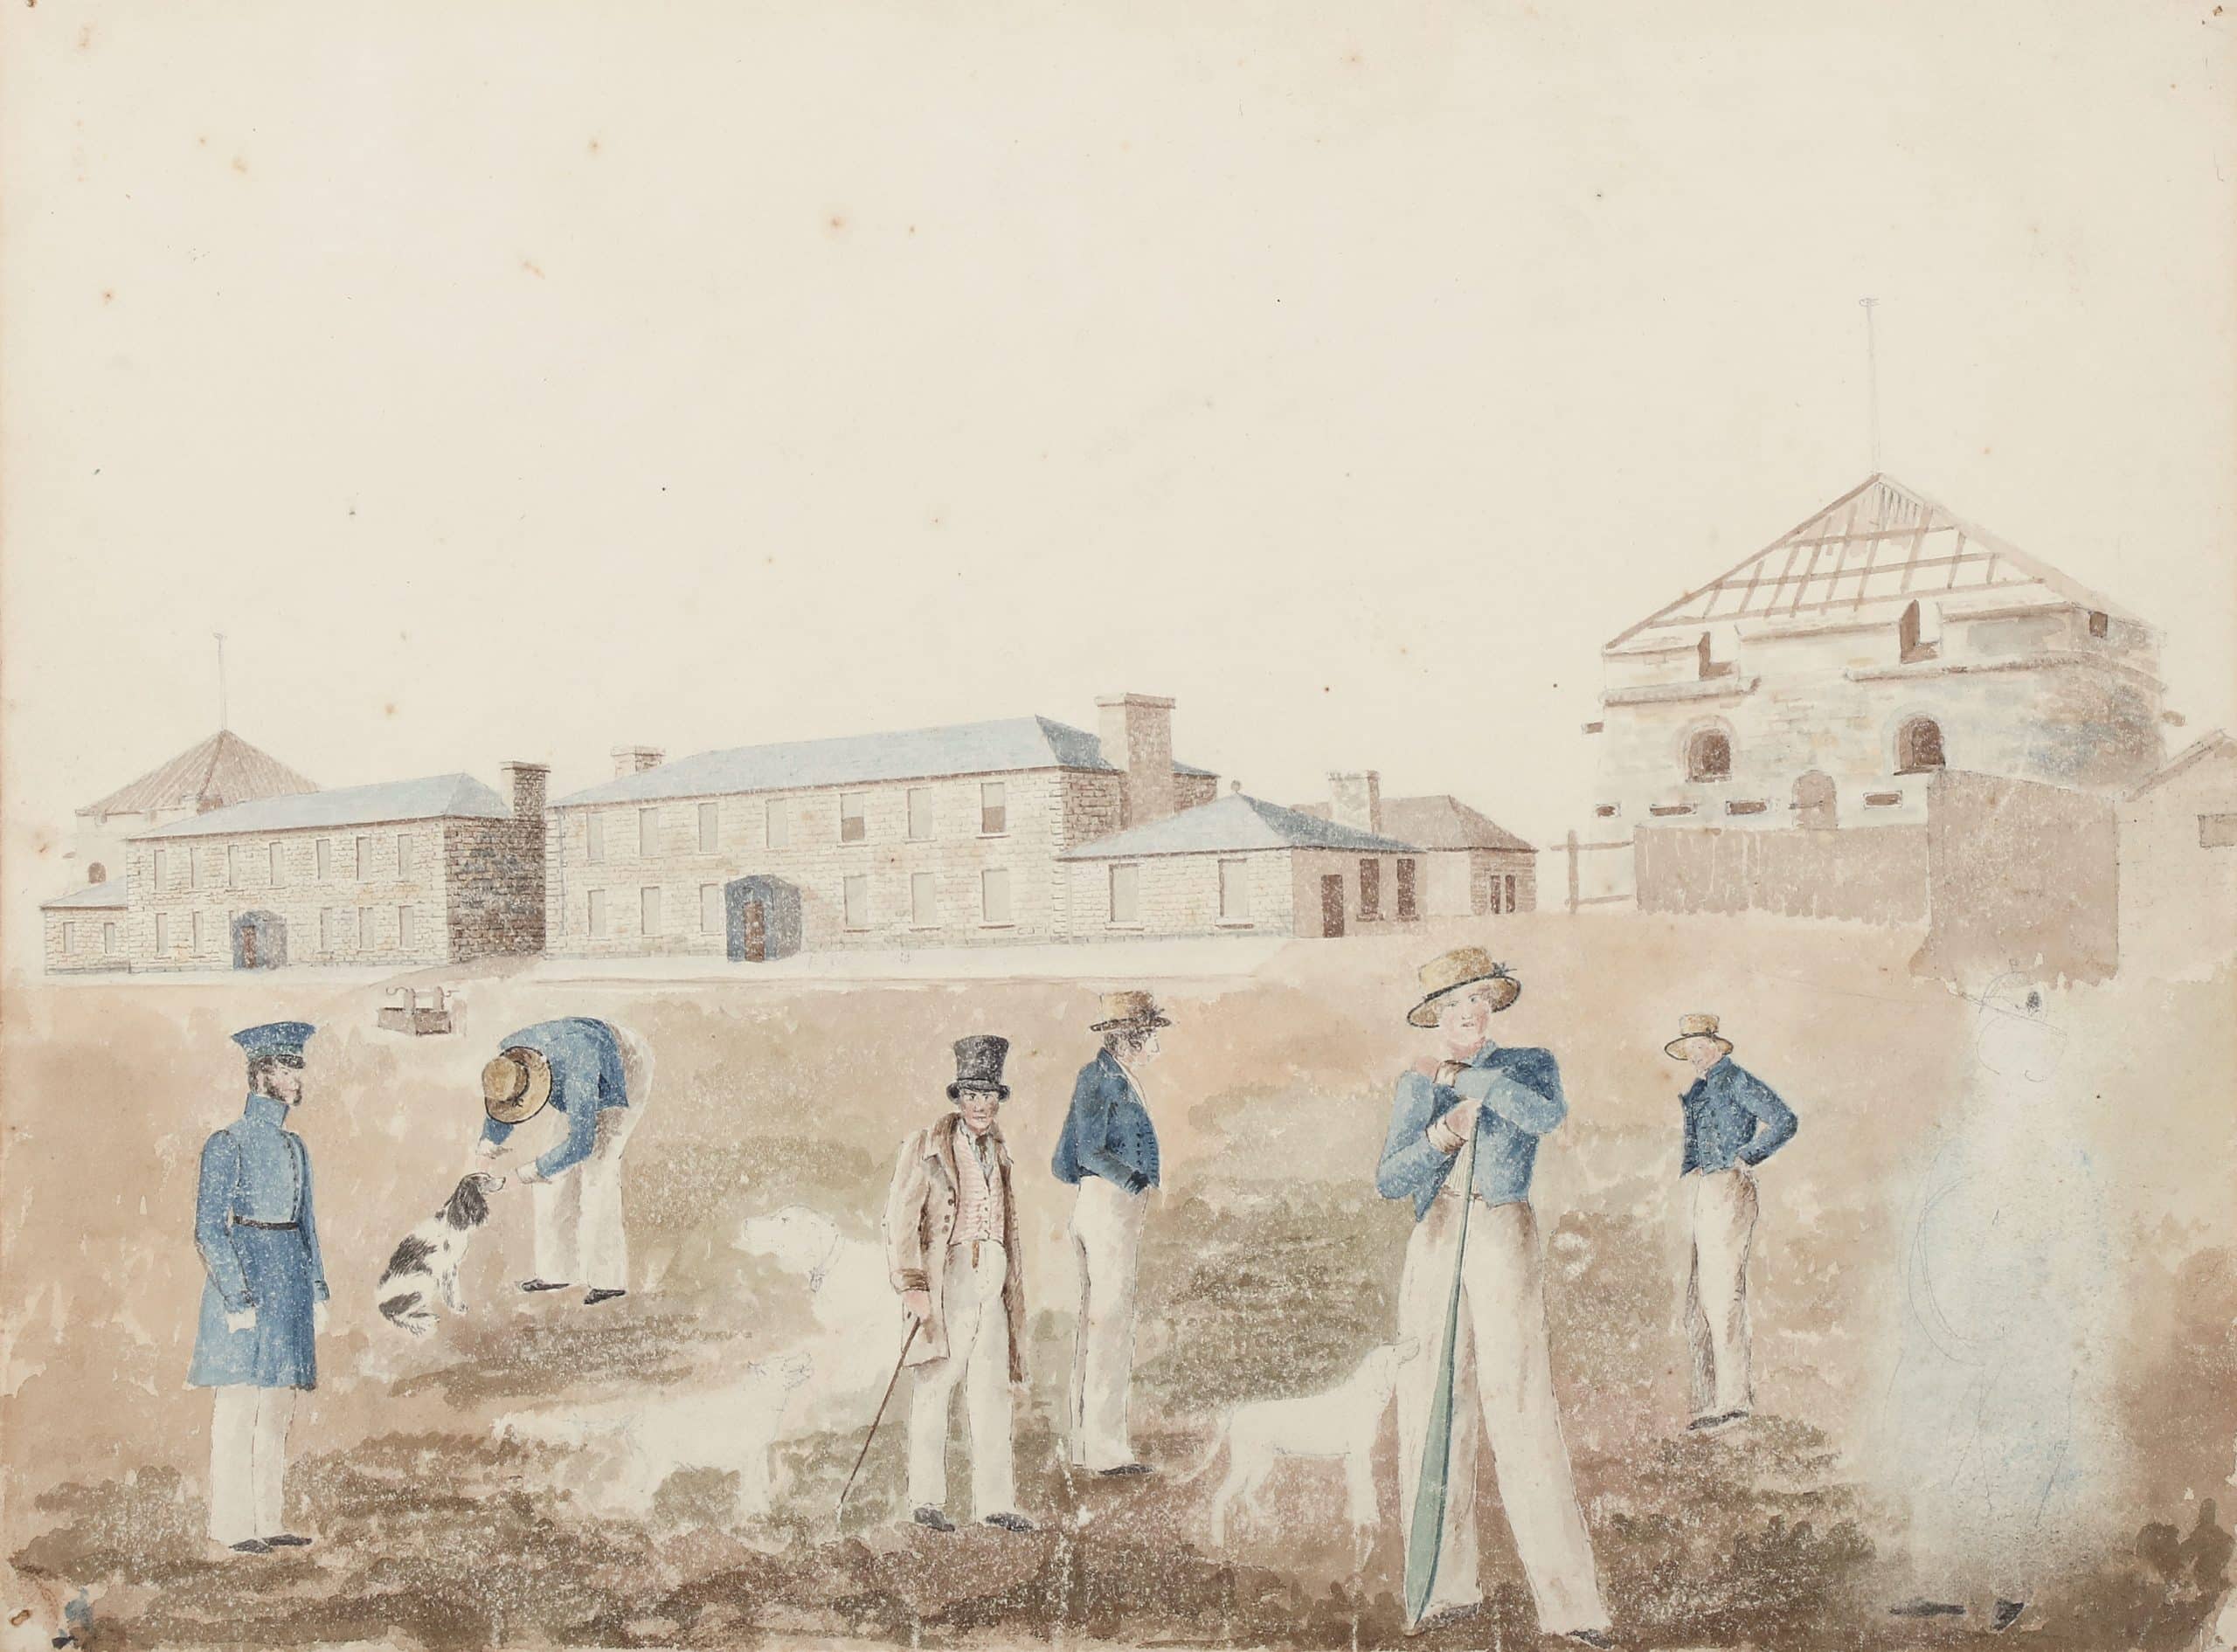 Charles F. Gibson, Untitled (Men with Dogs, outside the Barracks of Fort Henry), around 1832, pencil, pen and ink, and watercolour on paper